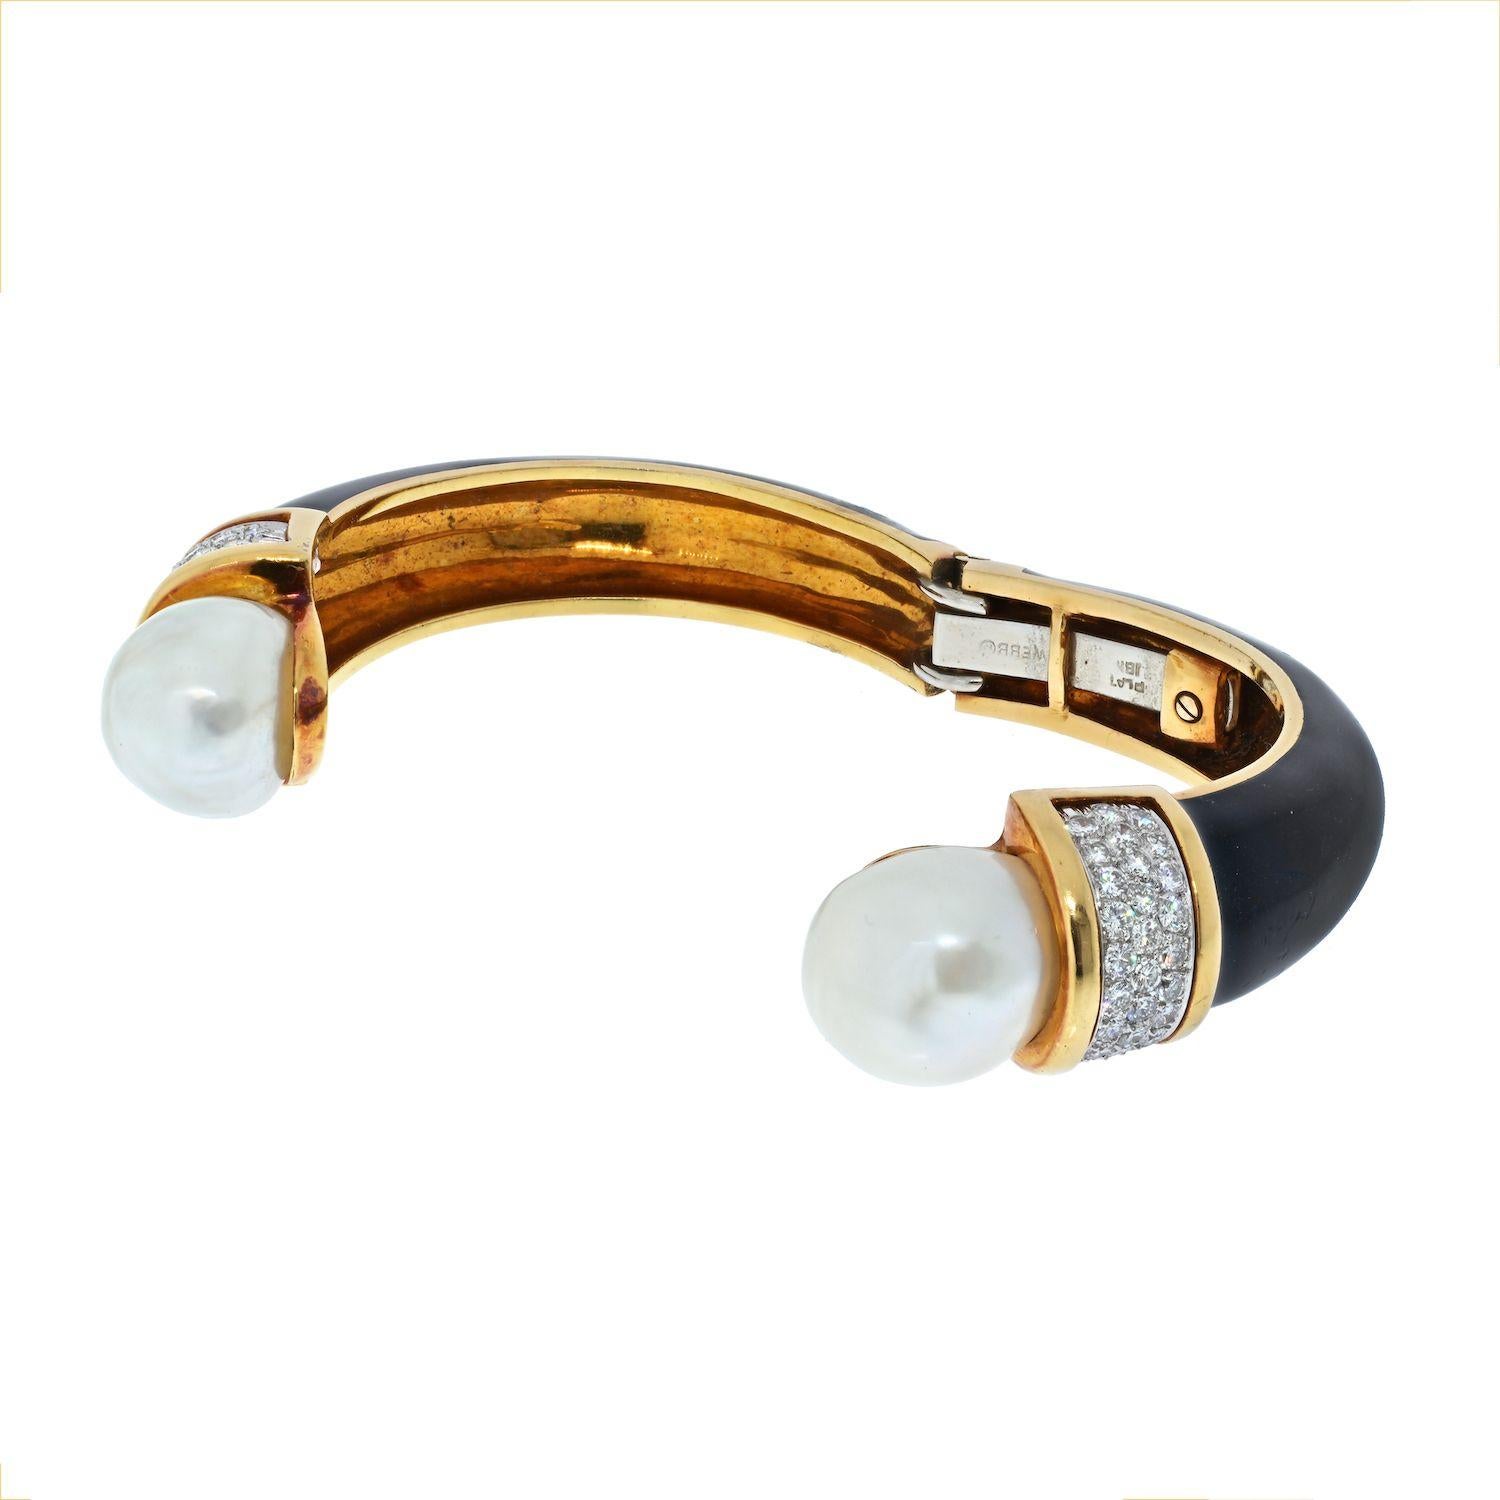 You'll love wearing this bold and beautiful David Webb hinged cuff bracelet crafted in 18k yellow gold and platinum, ends are punctuated with button cultured pearls and diamonds.
Work from 1970's. 
Inside circumference 14 cm. 